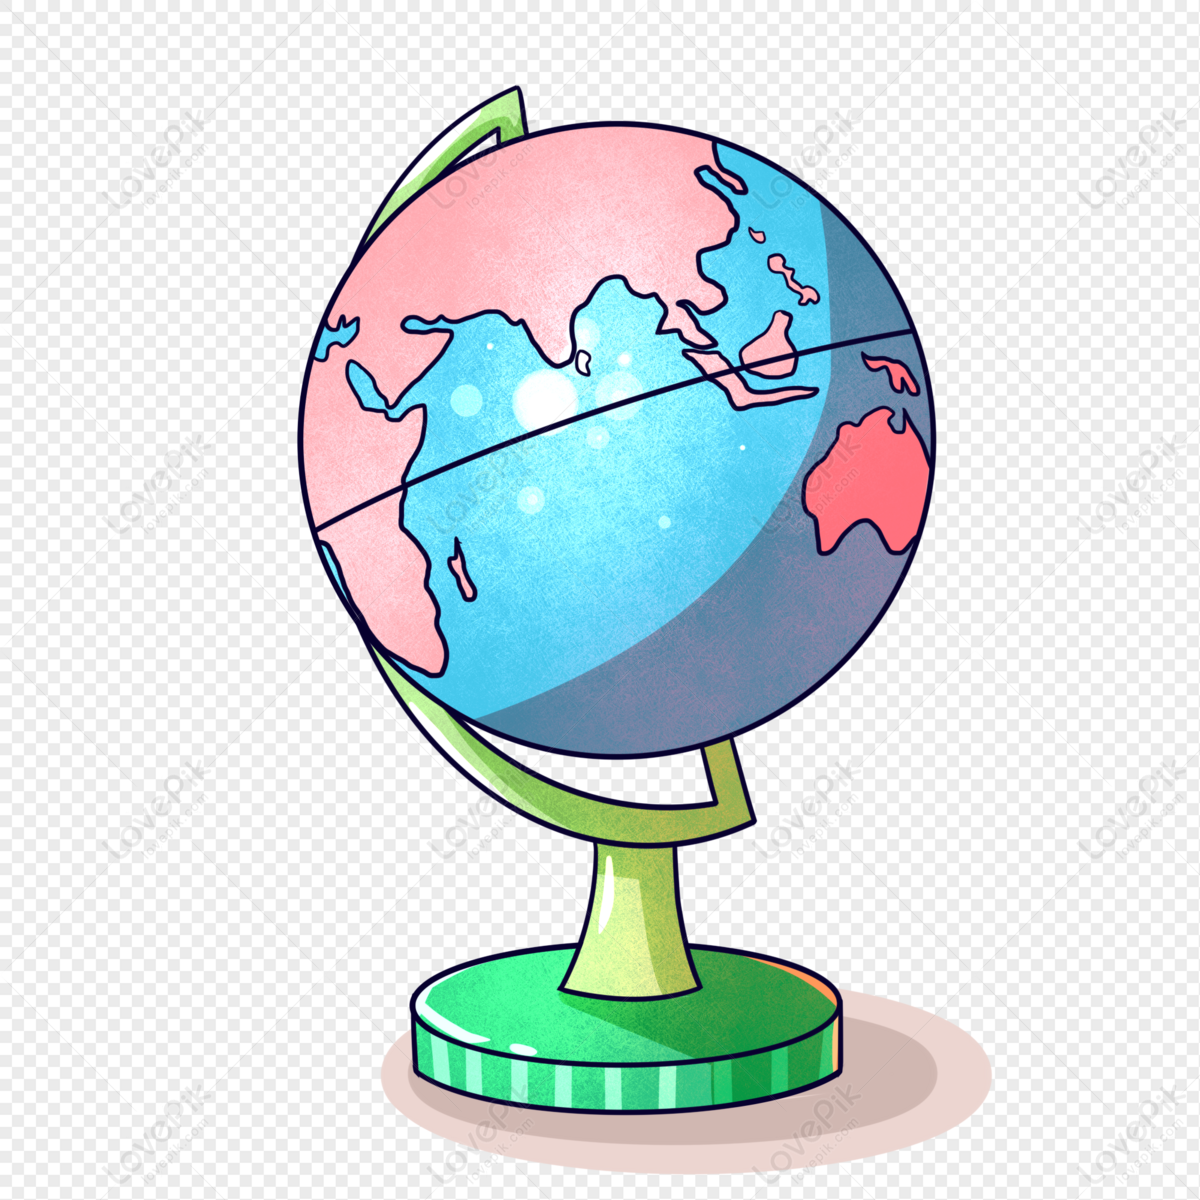 Cartoon Globe PNG Transparent Background And Clipart Image For Free  Download - Lovepik | 401425470